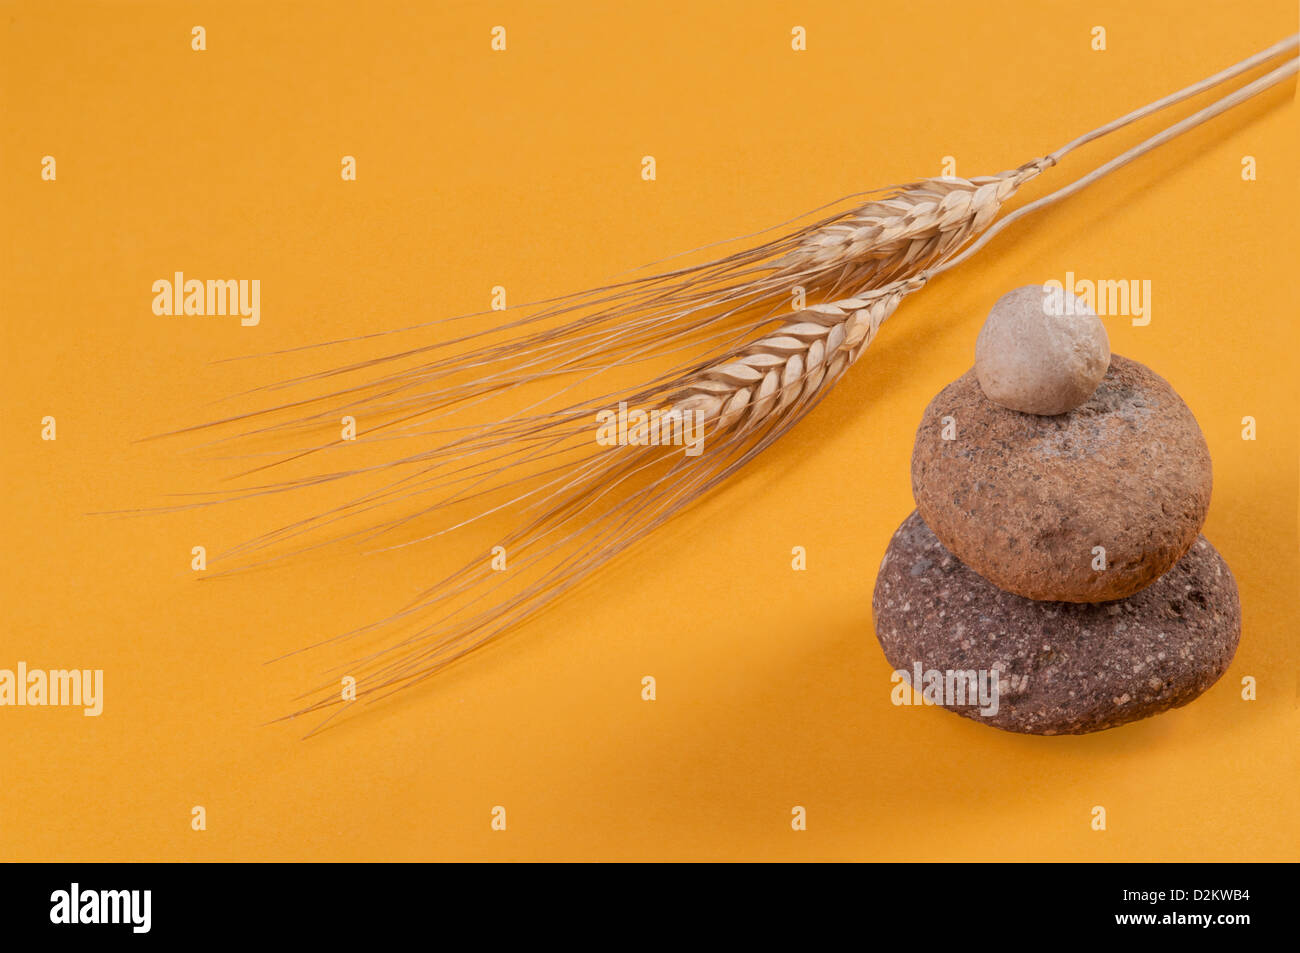 Stacked stones and Ears of wheat (Triticum spp.) Stock Photo